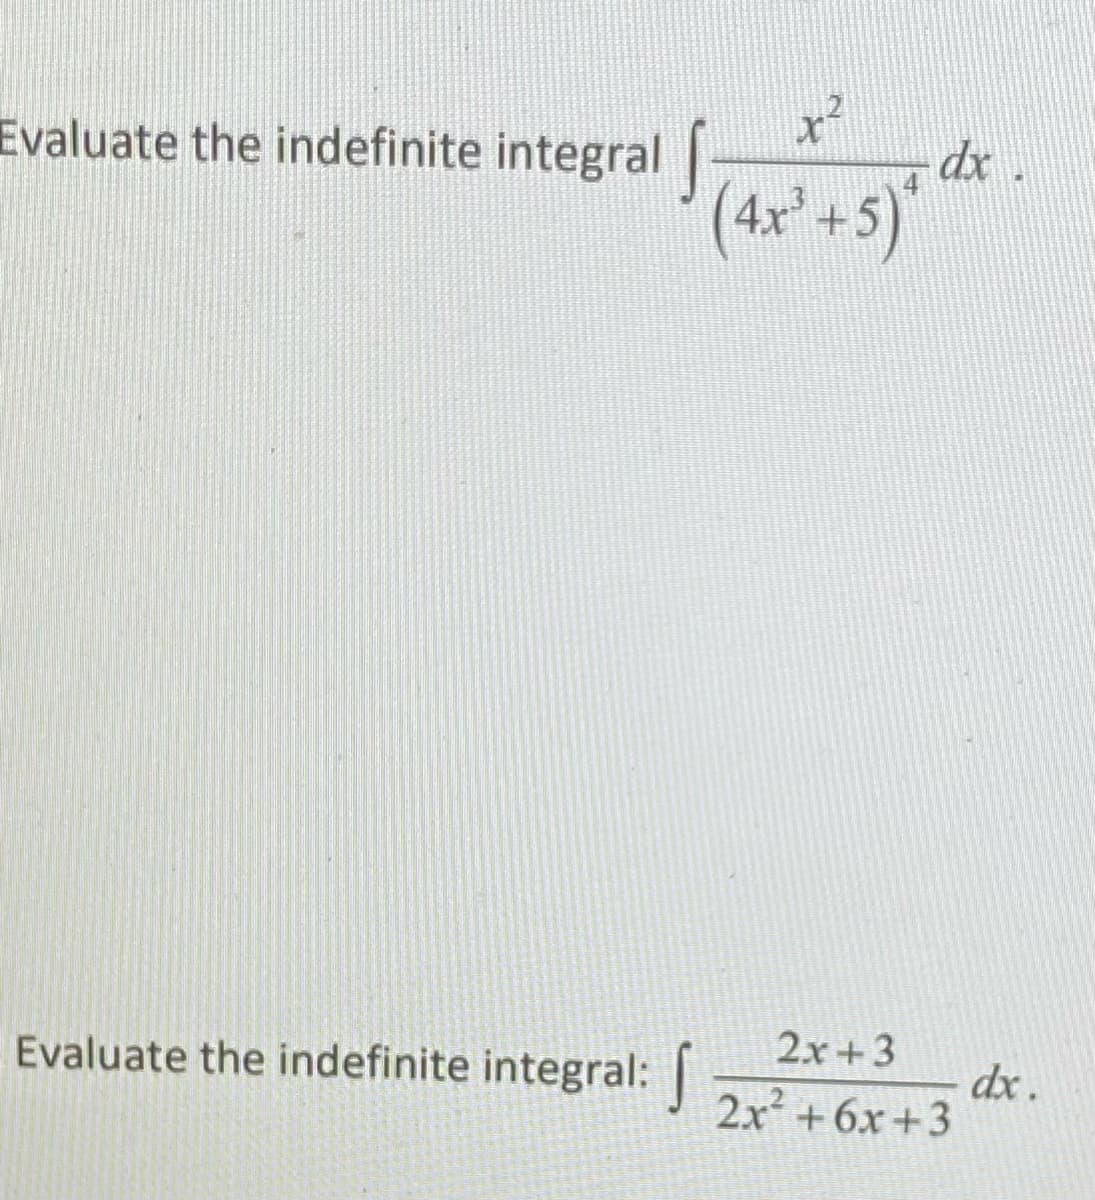 Evaluate the indefinite integral |
x²
dx
(4x" +5)*
2x+3
Evaluate the indefinite integral:
dx.
2x +6x+3
